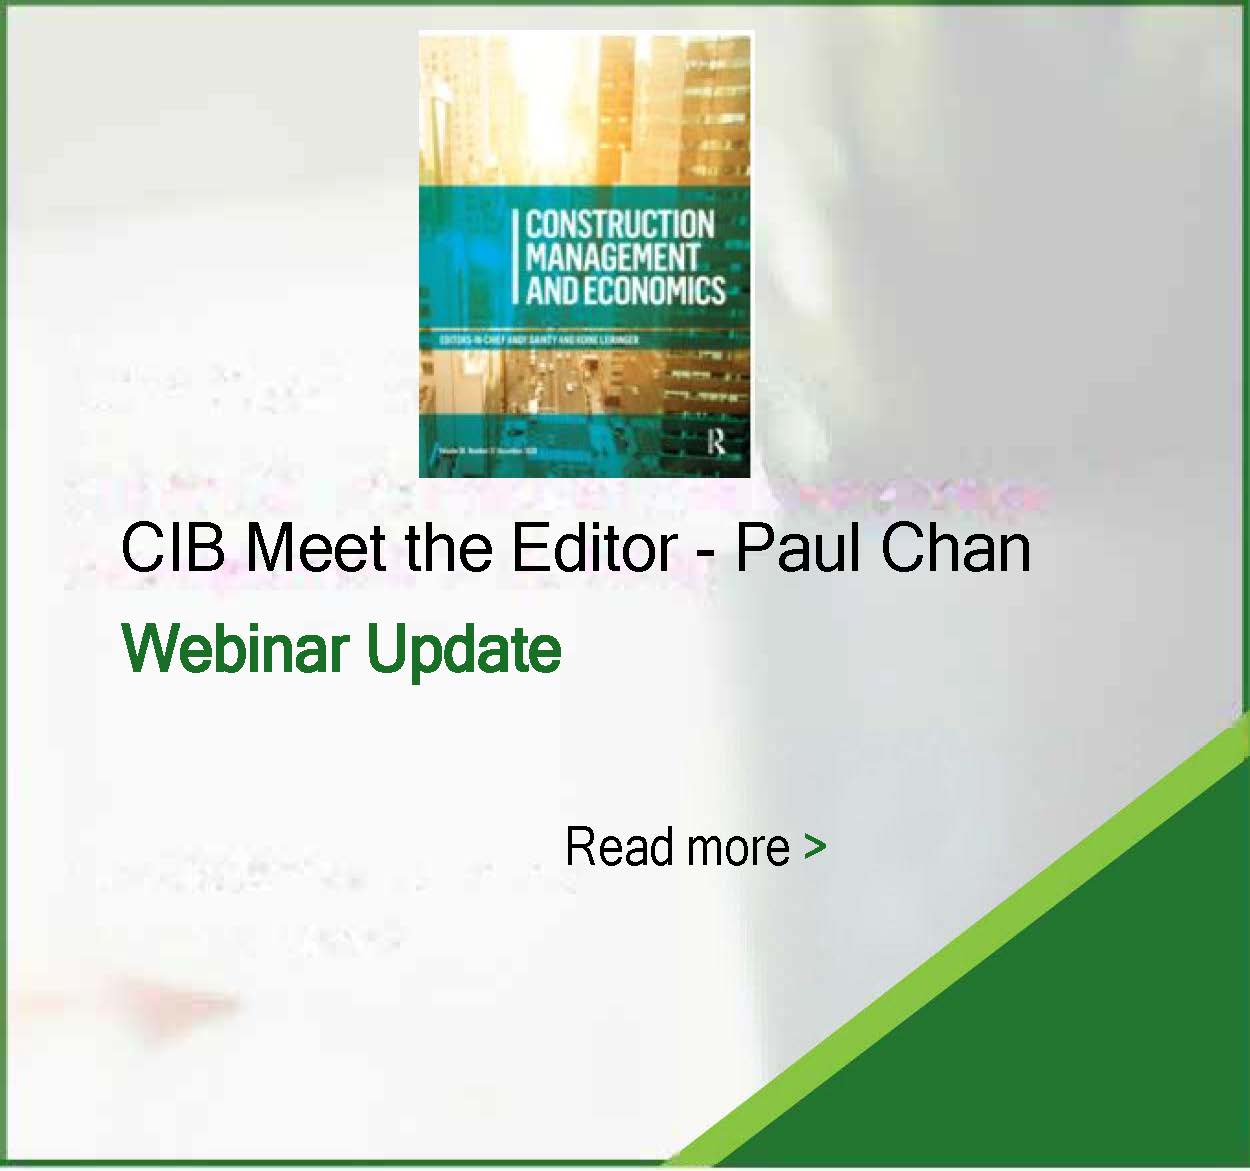 CIB ‘Meet the Editor’ Webinar with Paul Chan 3 May 2021 Construction Management and Economics